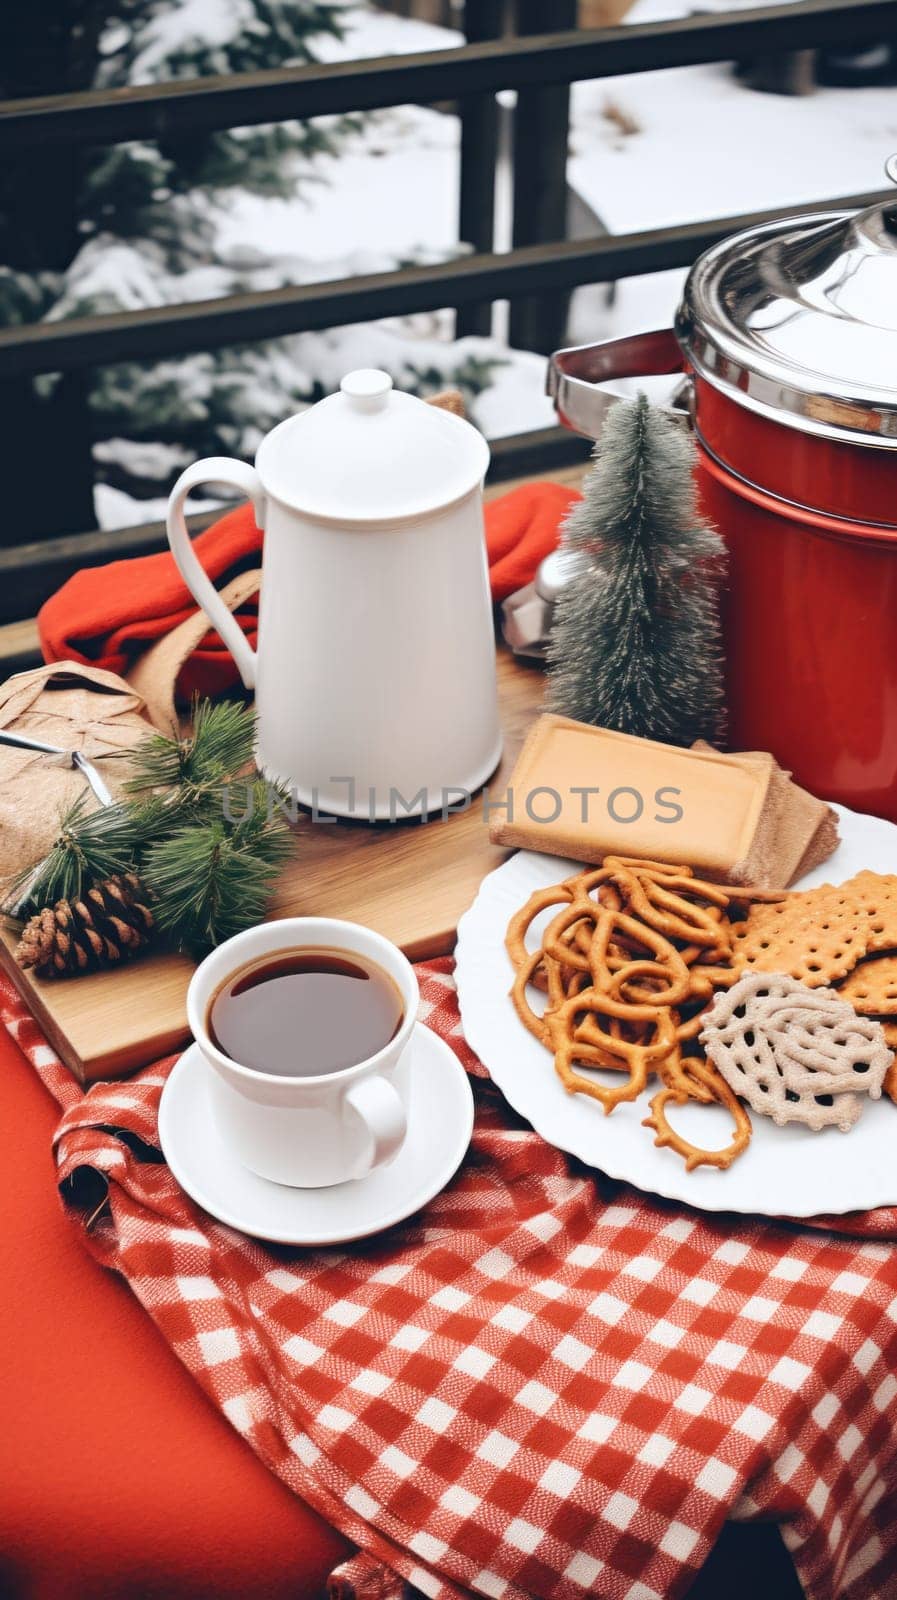 A table topped with a plate of pretzels and a cup of coffee, AI by starush